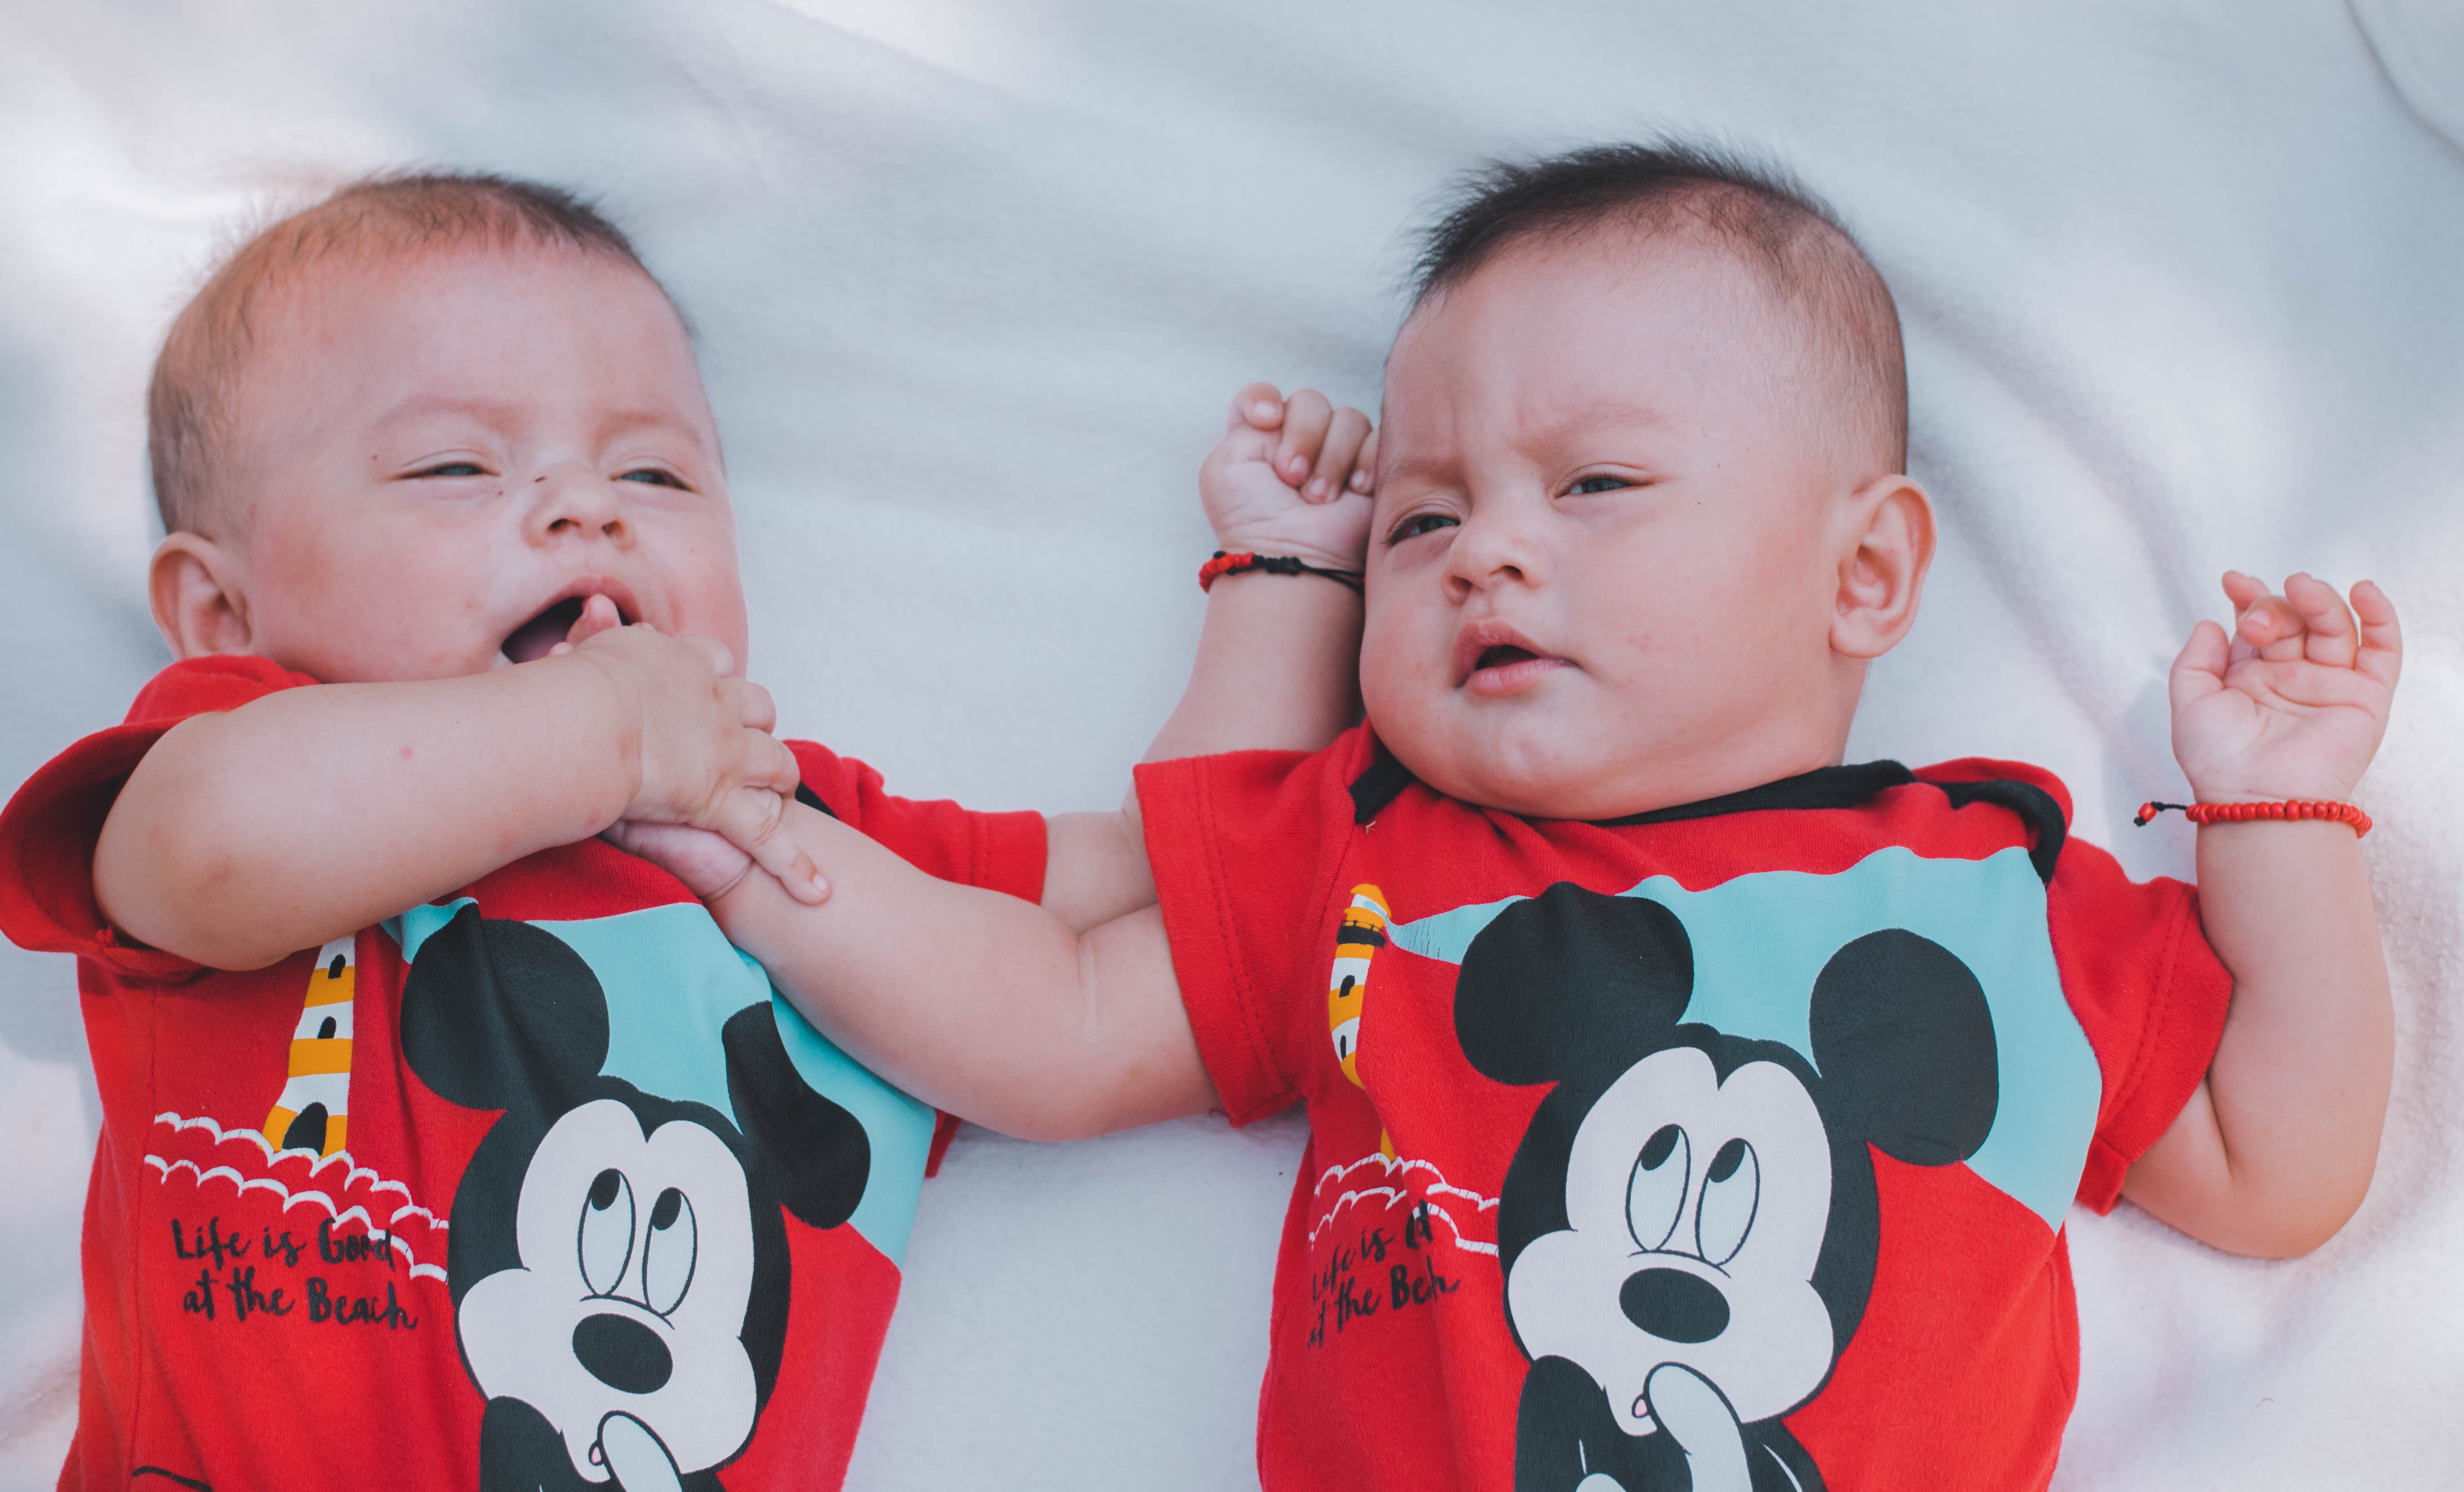 A pair of twin babies wearing identical shirts | Source: Pexels